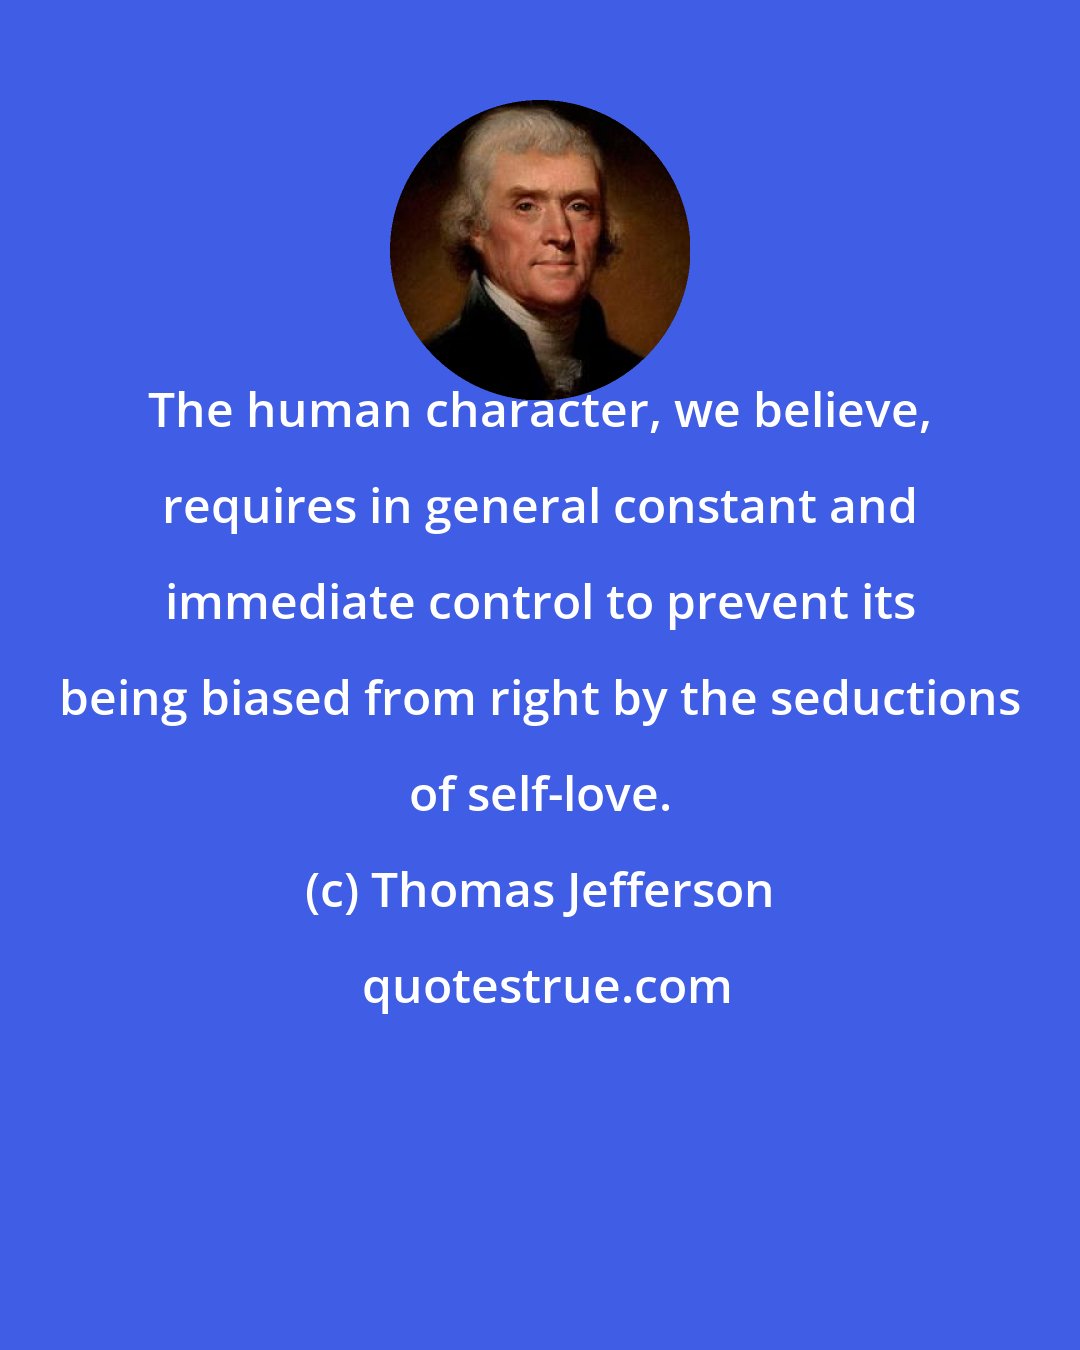 Thomas Jefferson: The human character, we believe, requires in general constant and immediate control to prevent its being biased from right by the seductions of self-love.